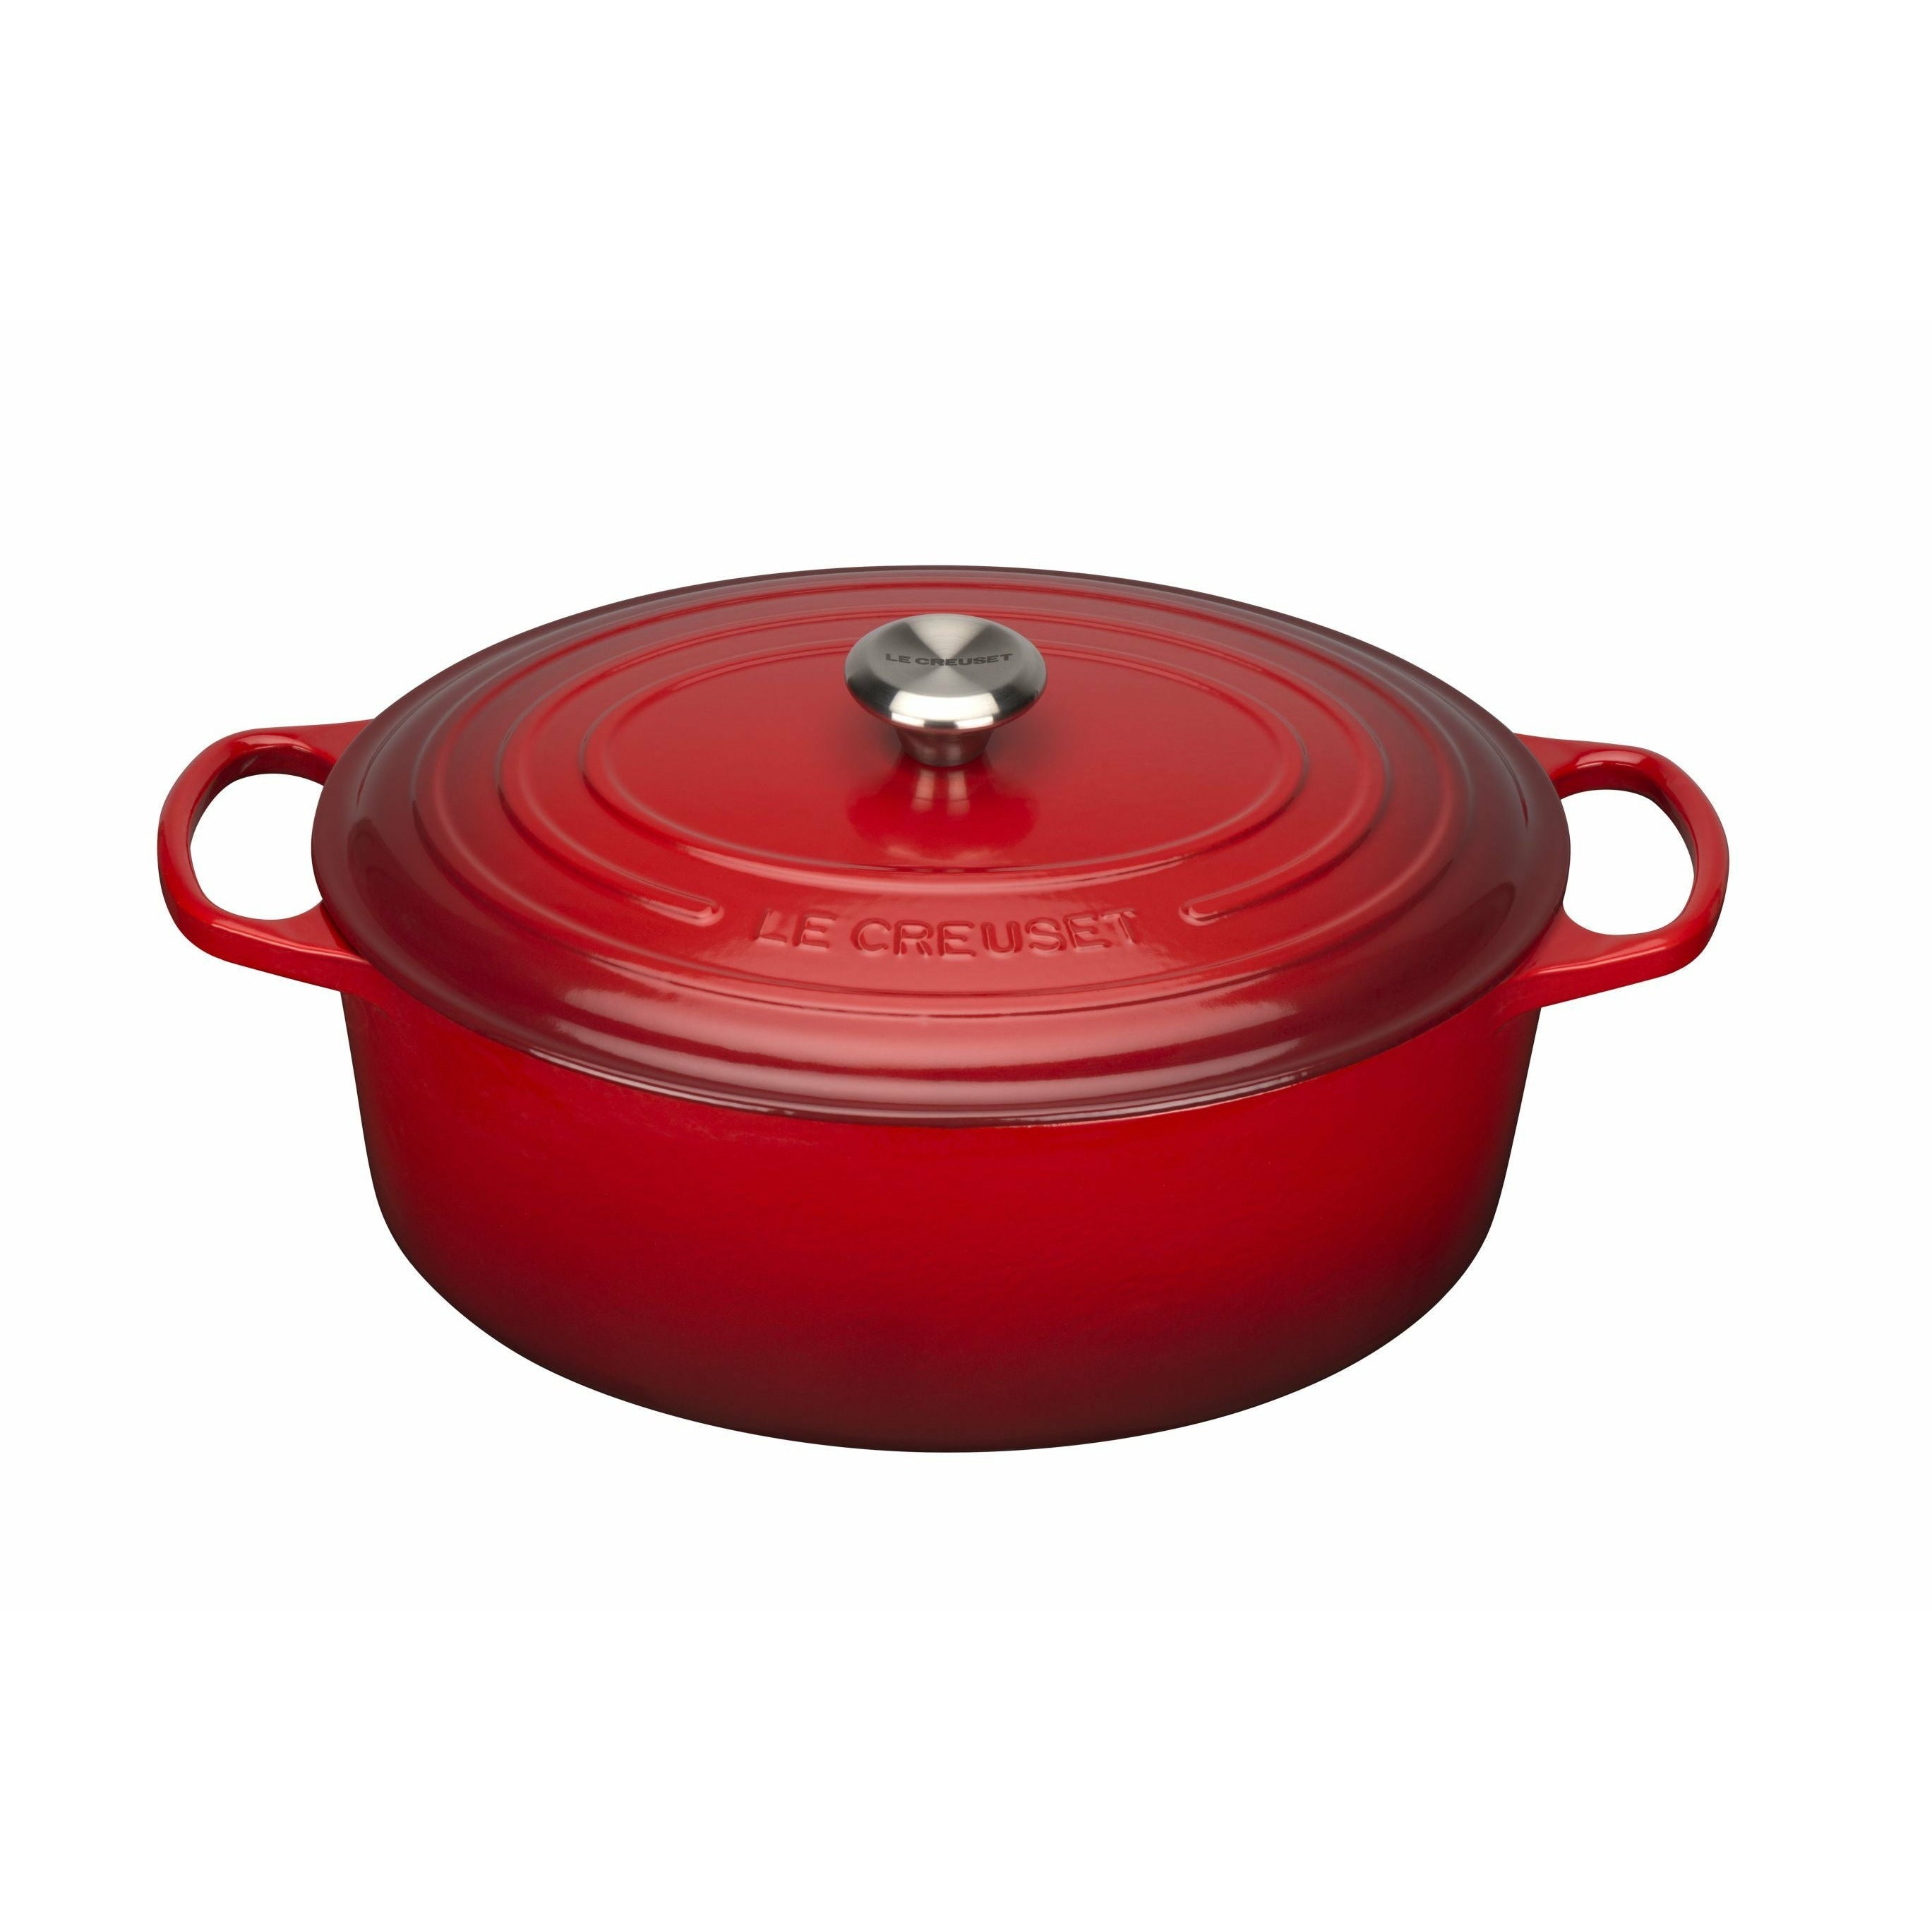 Le Creuset Signature Oval Roaster 35 Cm, Cherry Red